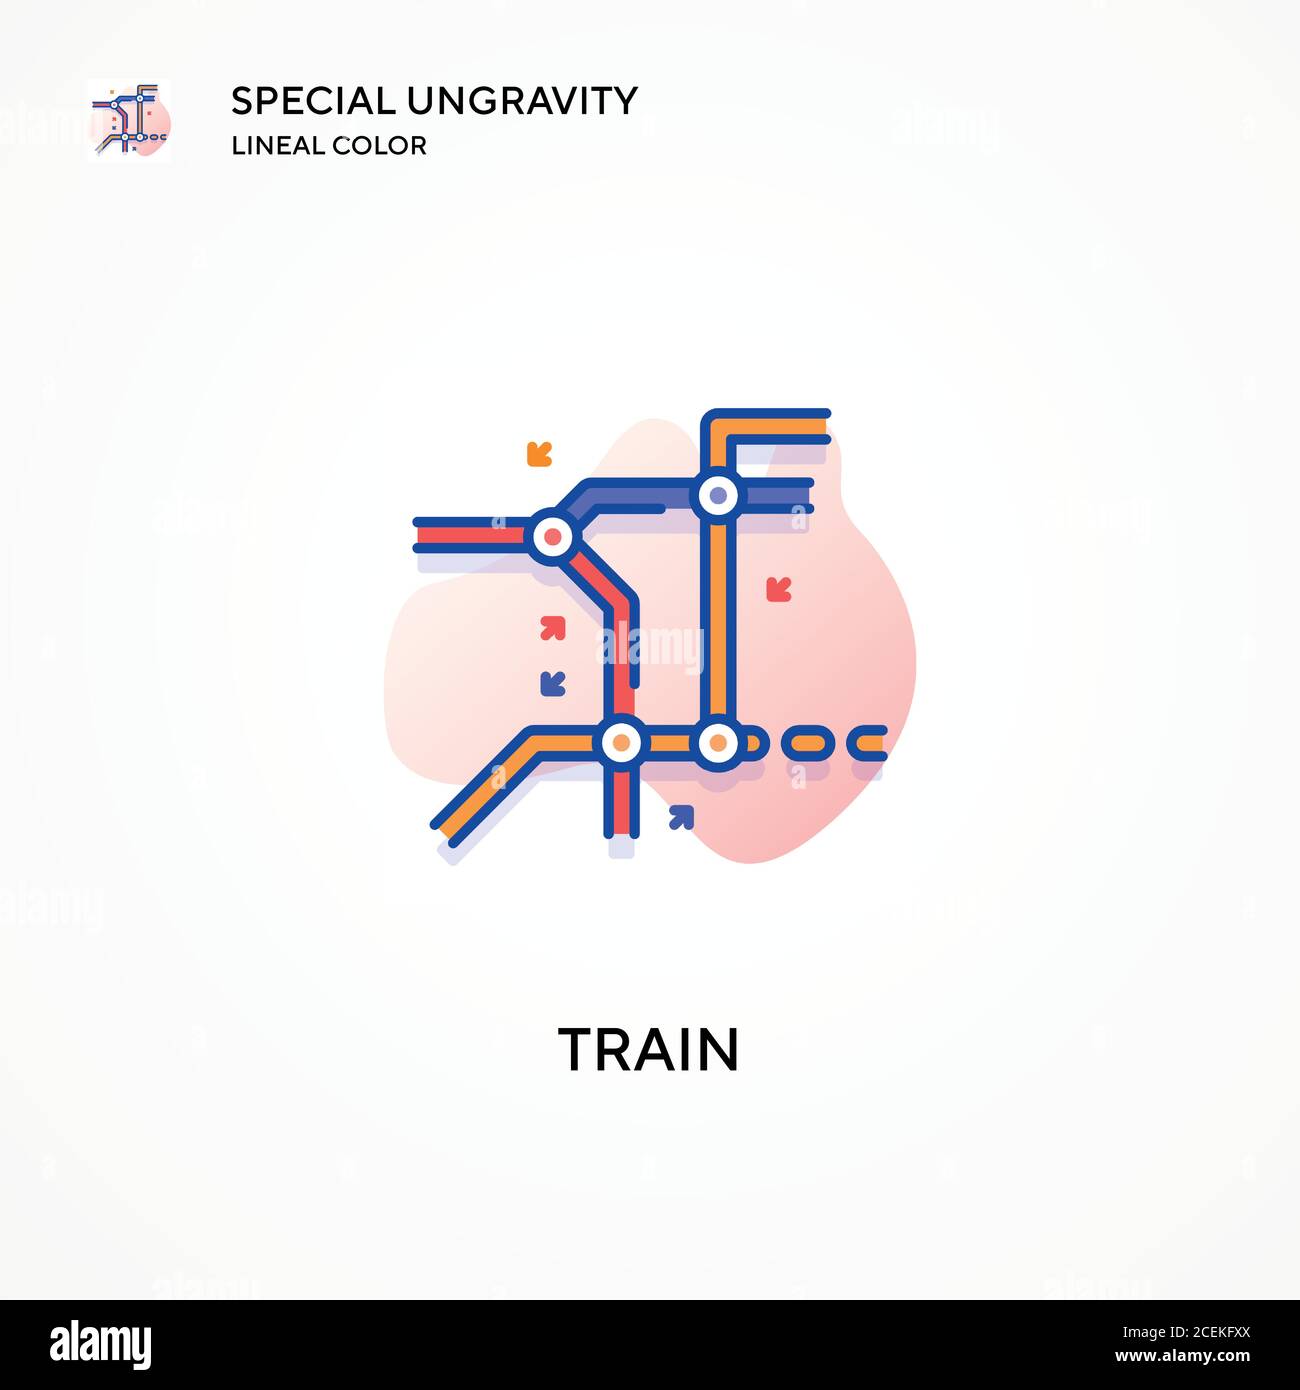 Train special ungravity lineal color icon. Modern vector illustration concepts. Easy to edit and customize. Stock Vector